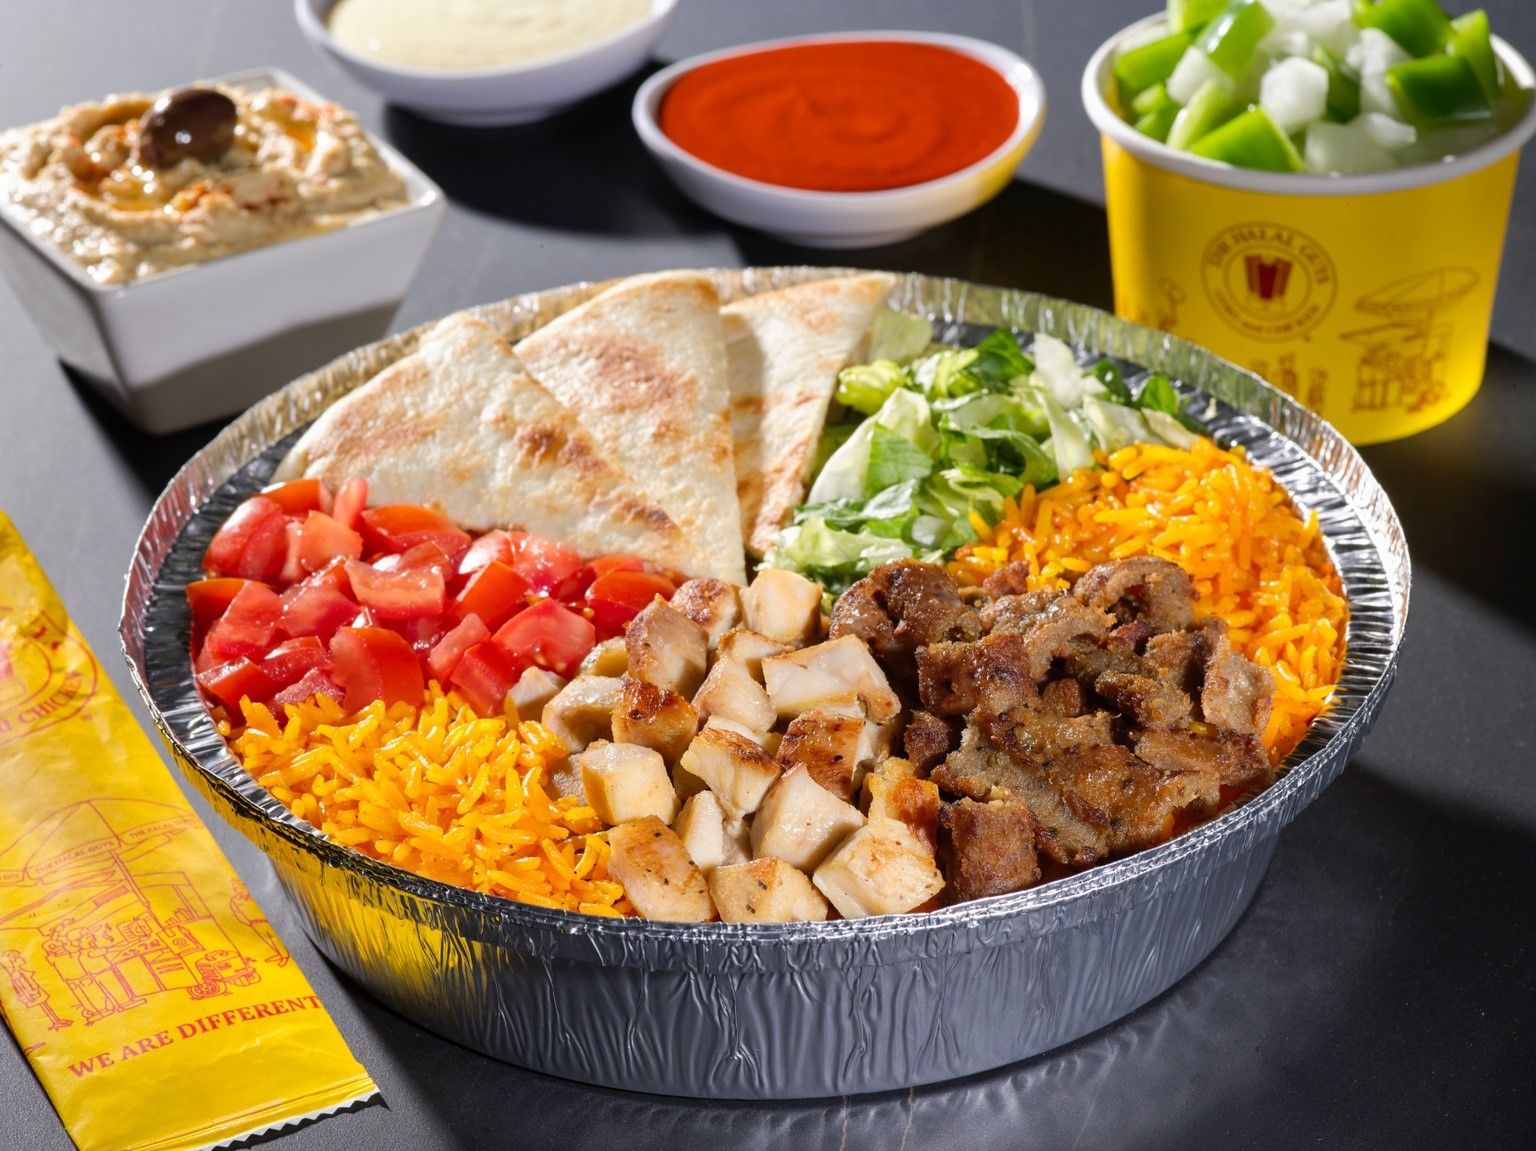 New Franchising Deal Will Bring NYC's Legendary The Halal Guys to Ohio